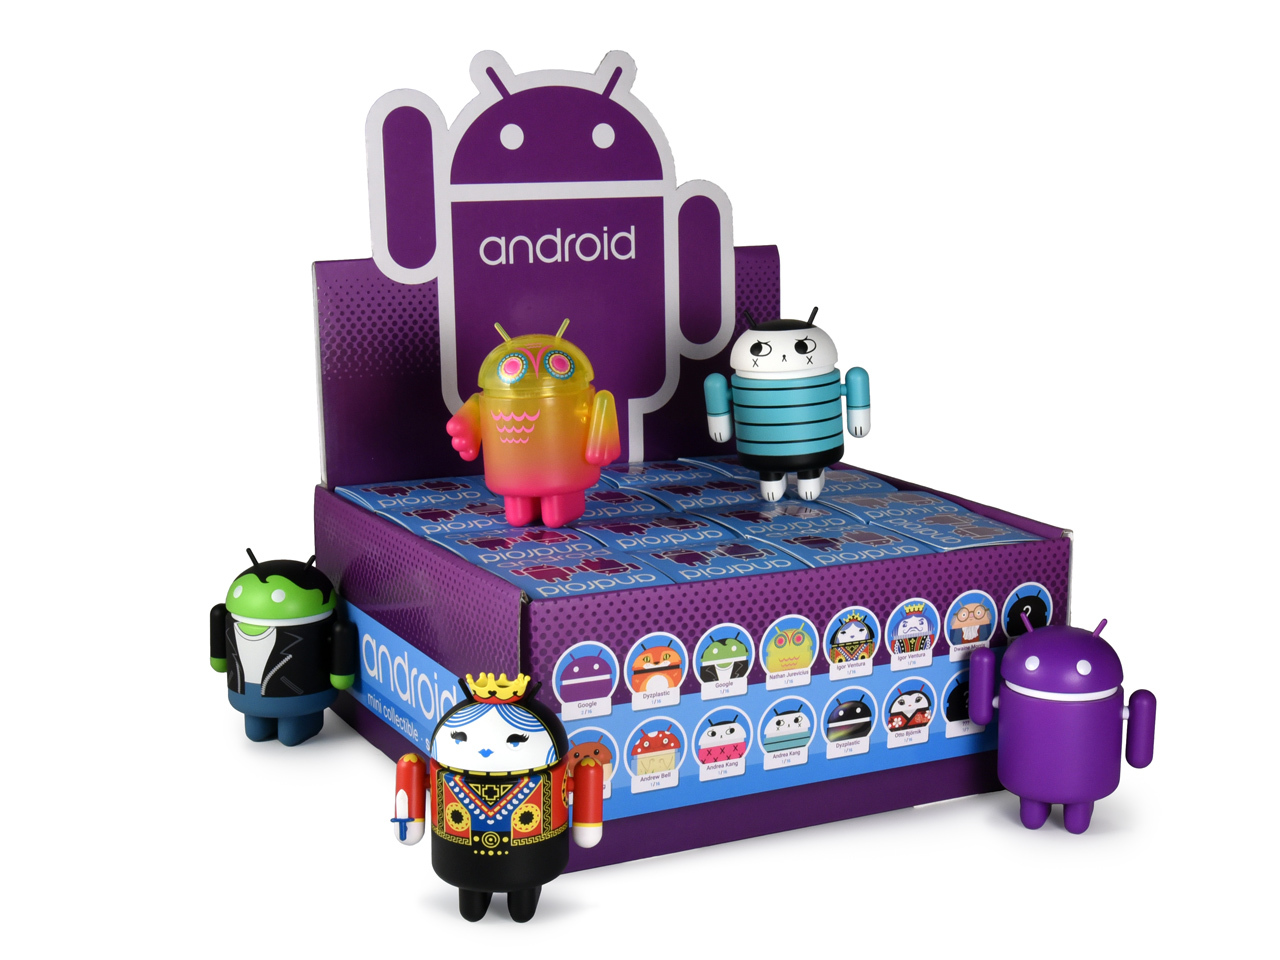 Toy android. Андроид игрушка. Картинки игрушки андроид. Android Collectible MWC. Купить мягкую игрушку андроид.